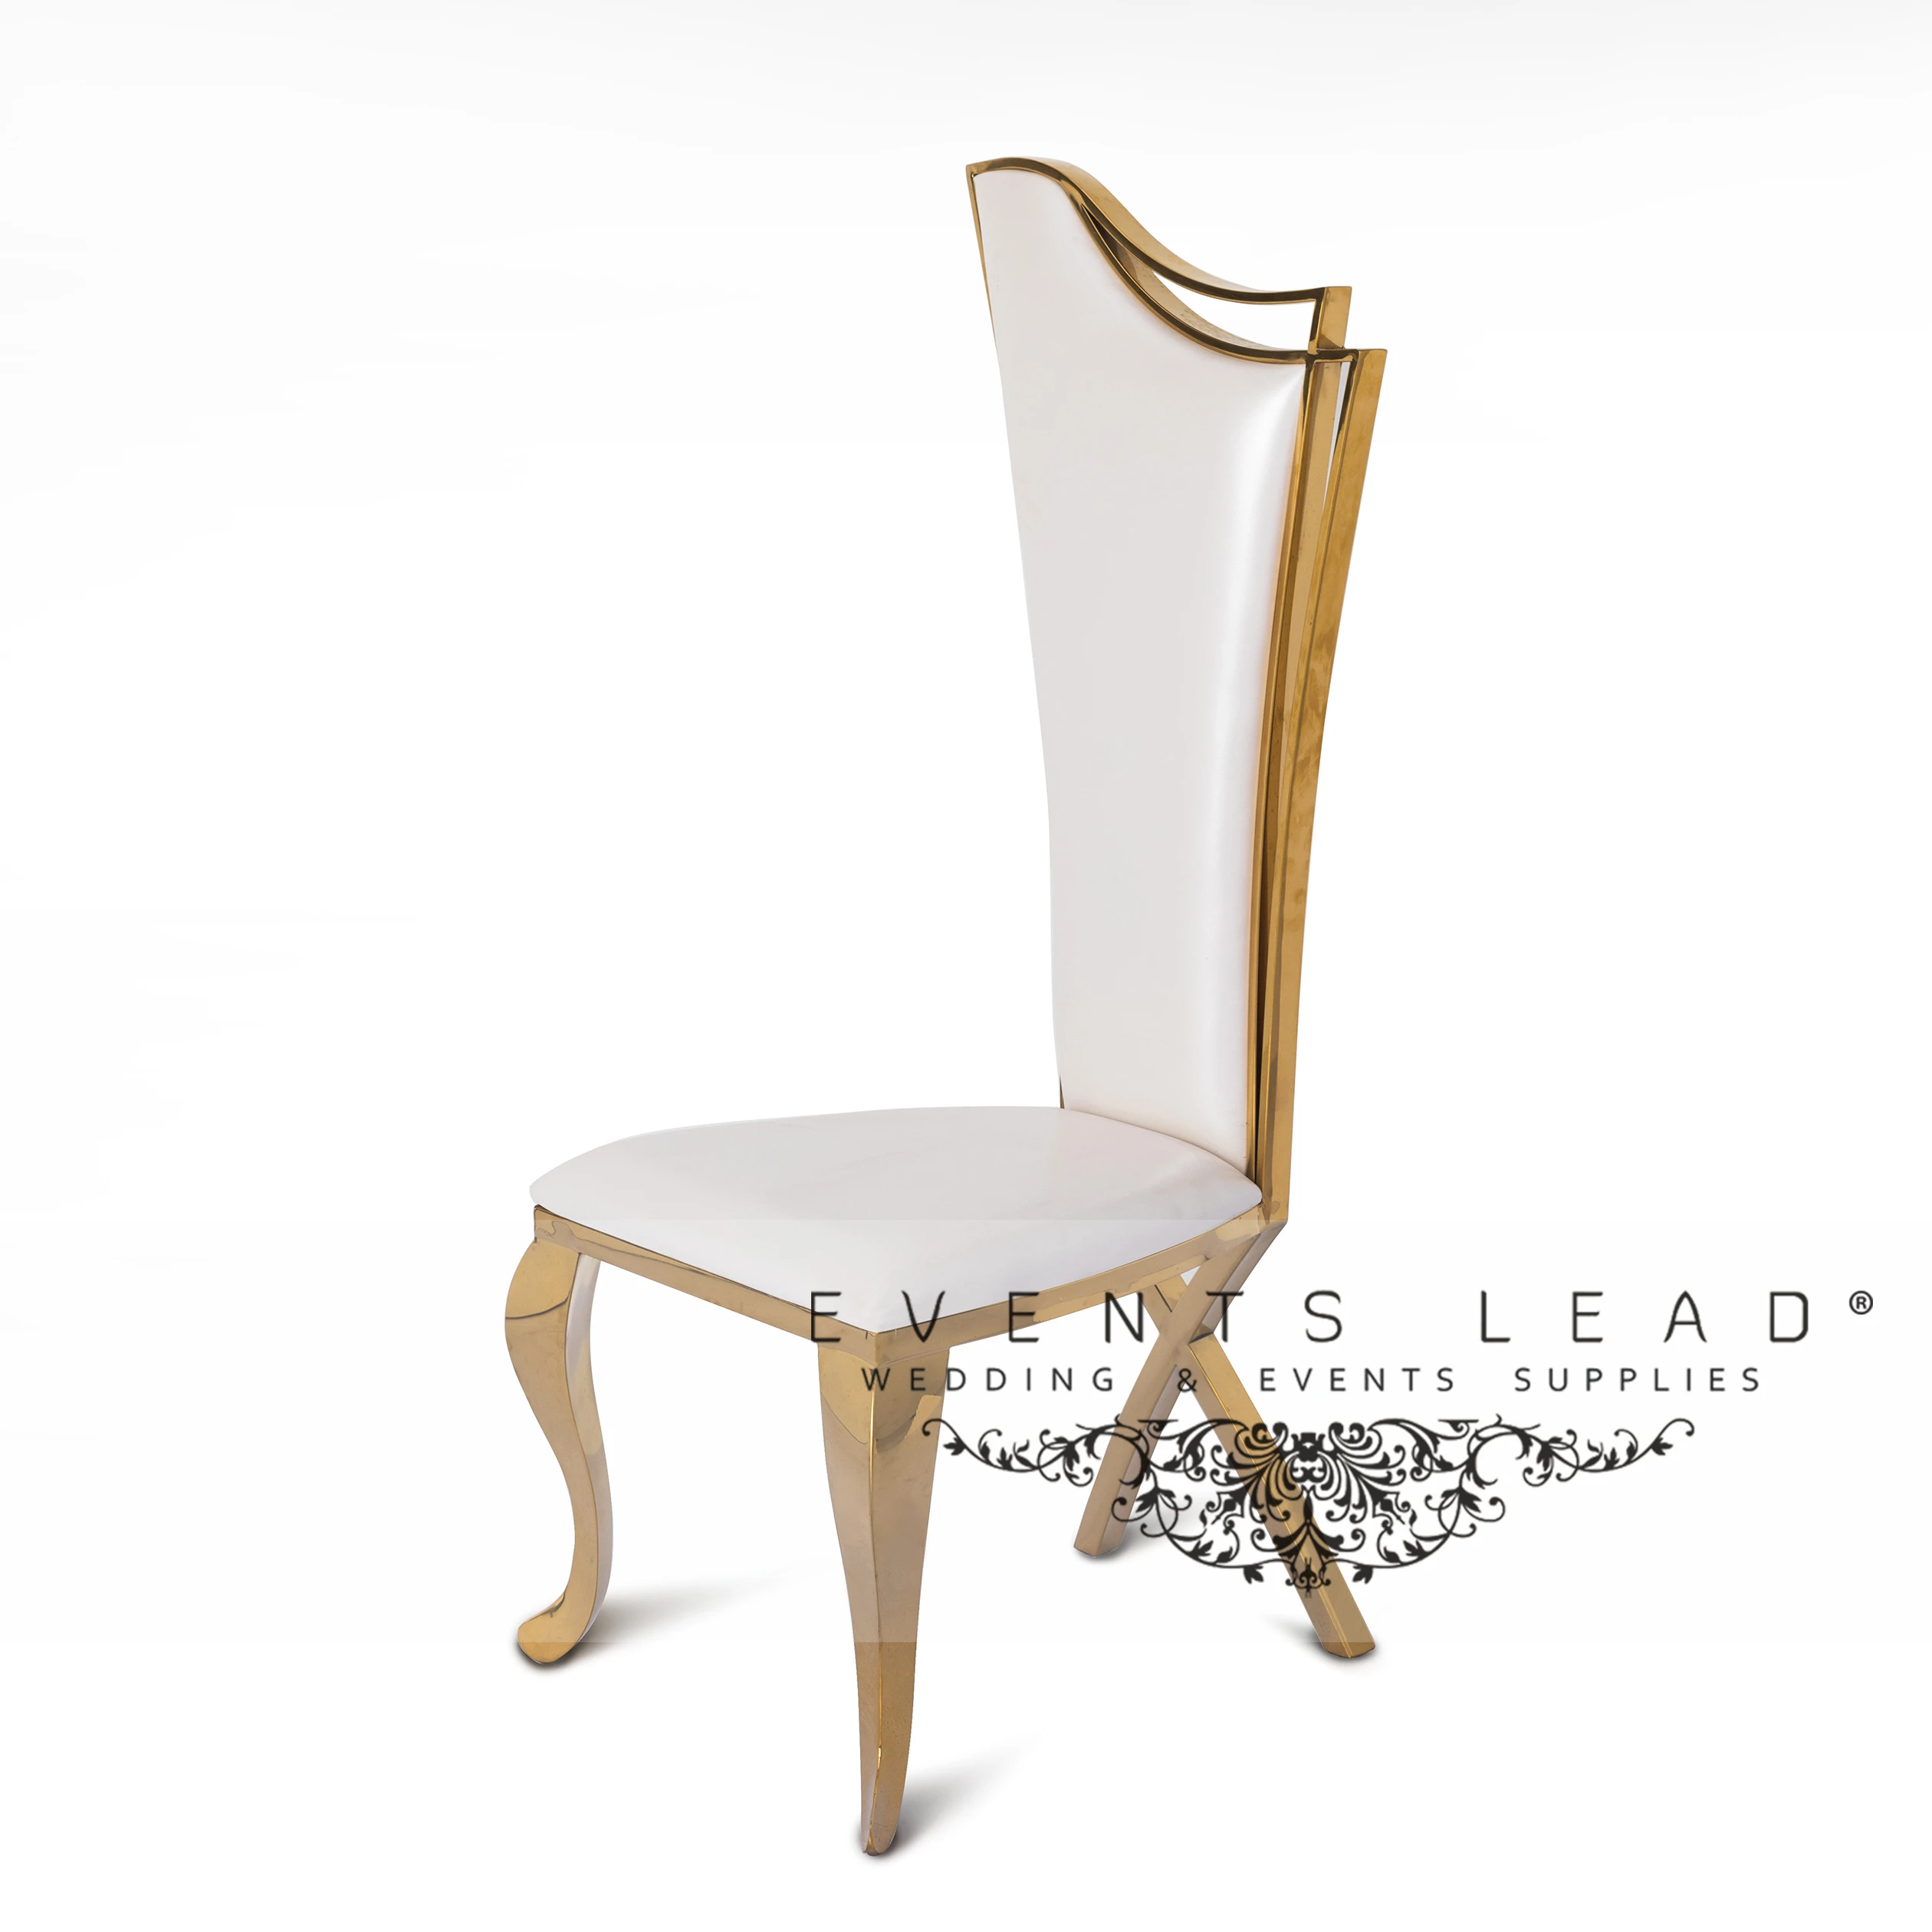 Hot Sell Elegant Wedding furniture VIANO Stainless Steel Chair